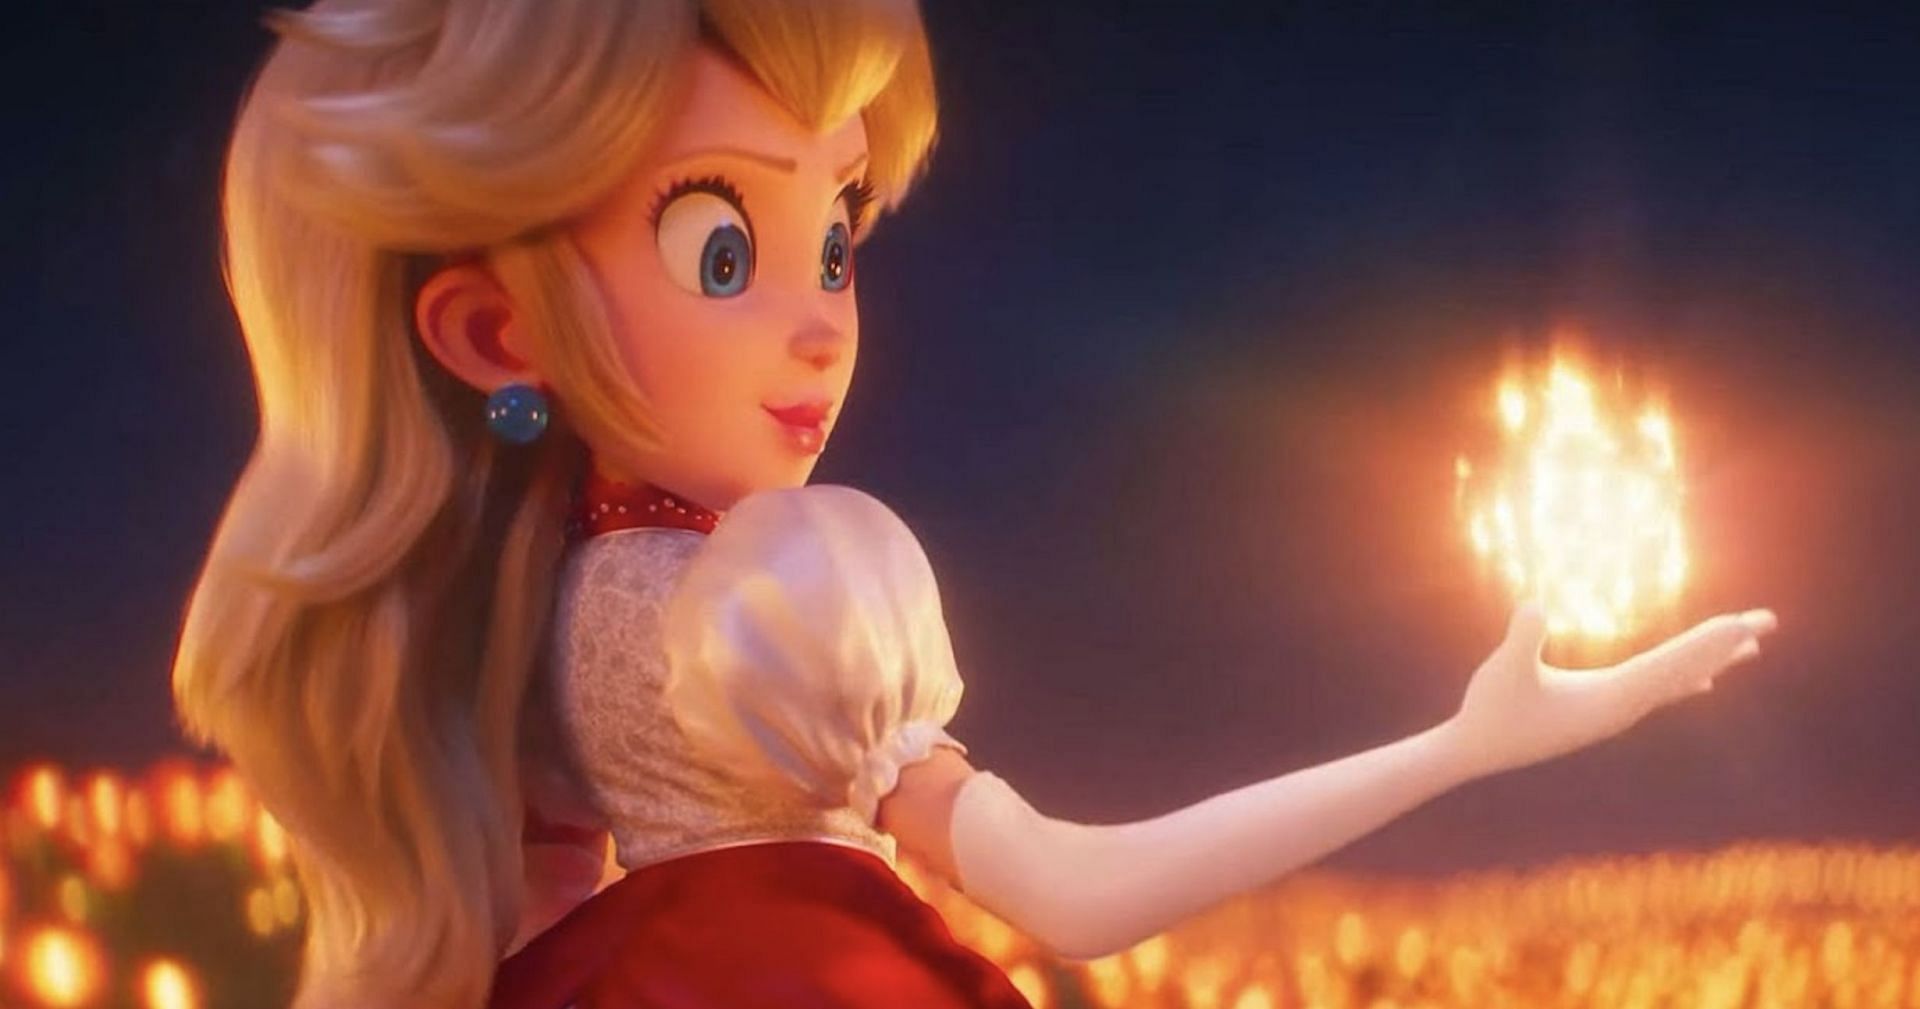 An exciting new take on Princess Peach in The Super Mario Bros movie (Image via Universal Pictures)